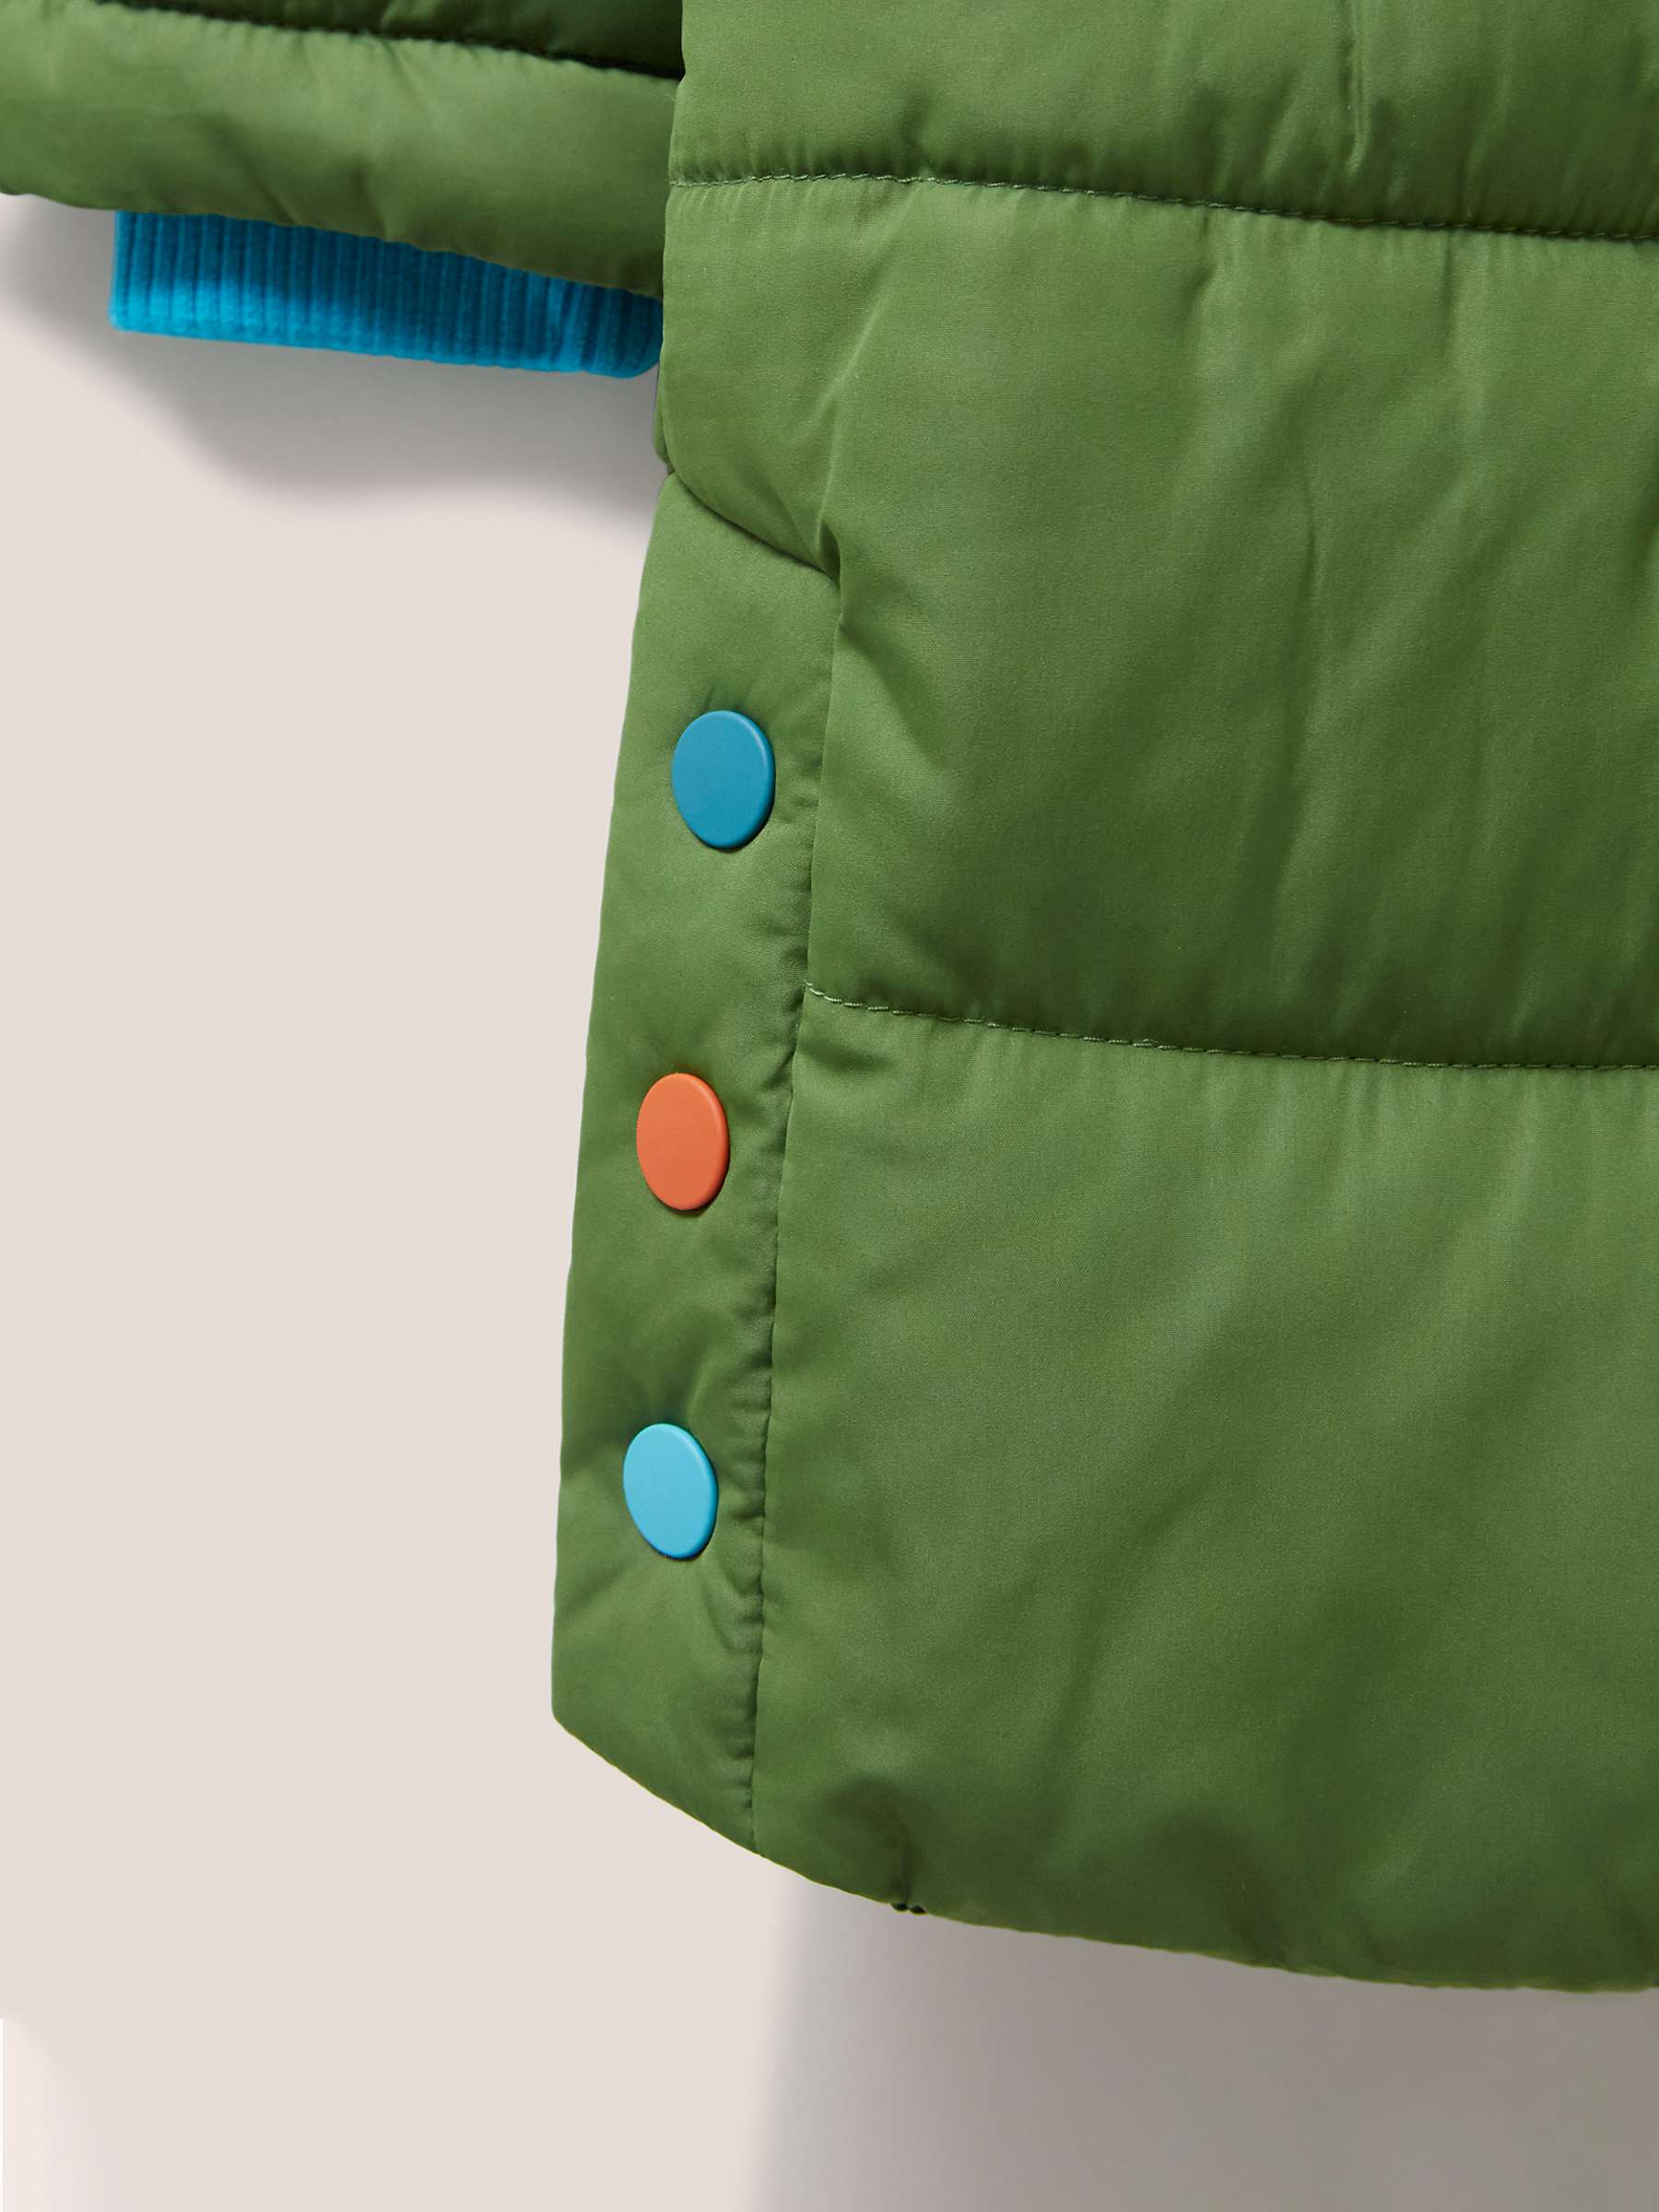 Buy White Stuff Kids' Longline Quilted Hooded Puffer Jacket, Mid Teal Online at johnlewis.com